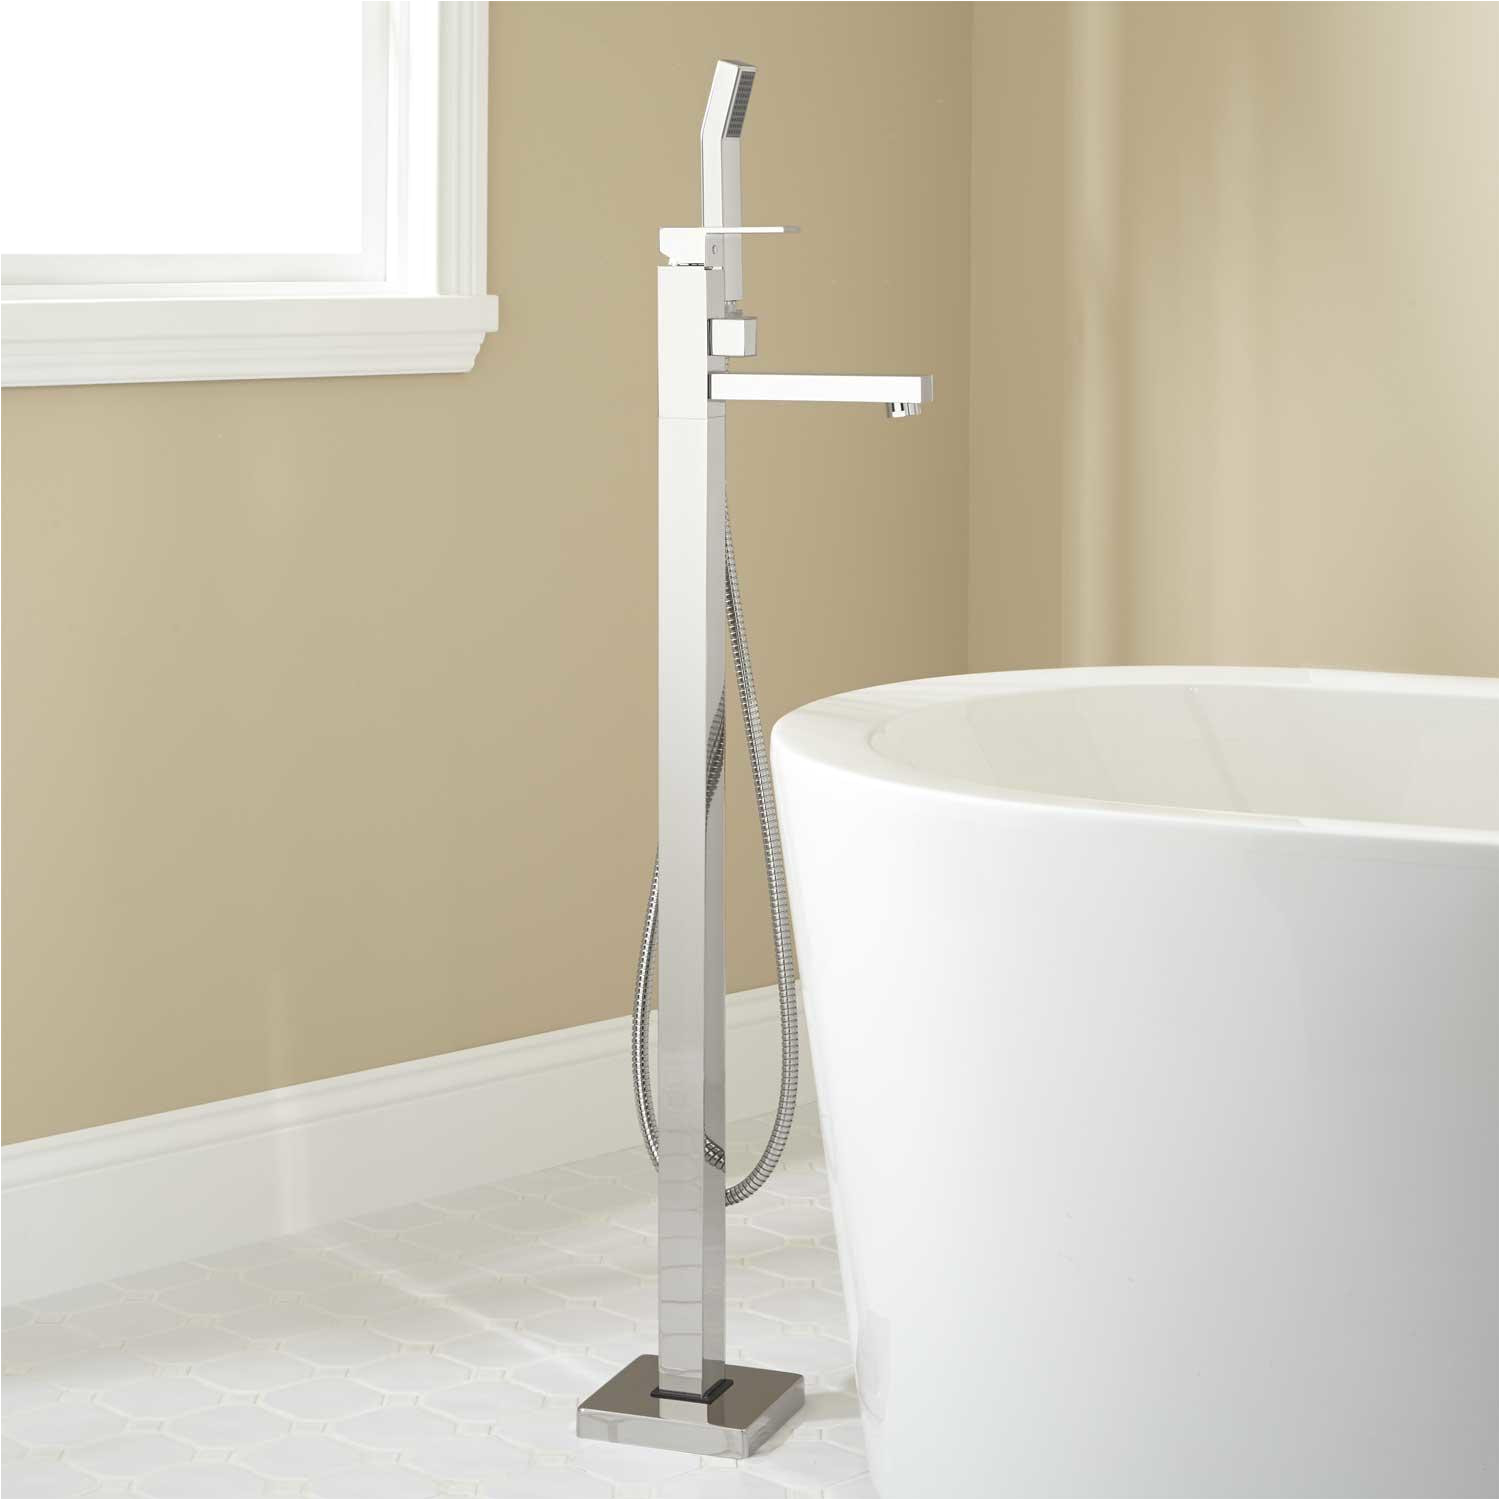 Faucets for Freestanding Tubs Gothenburg Freestanding Tub Faucet Freestanding Tub